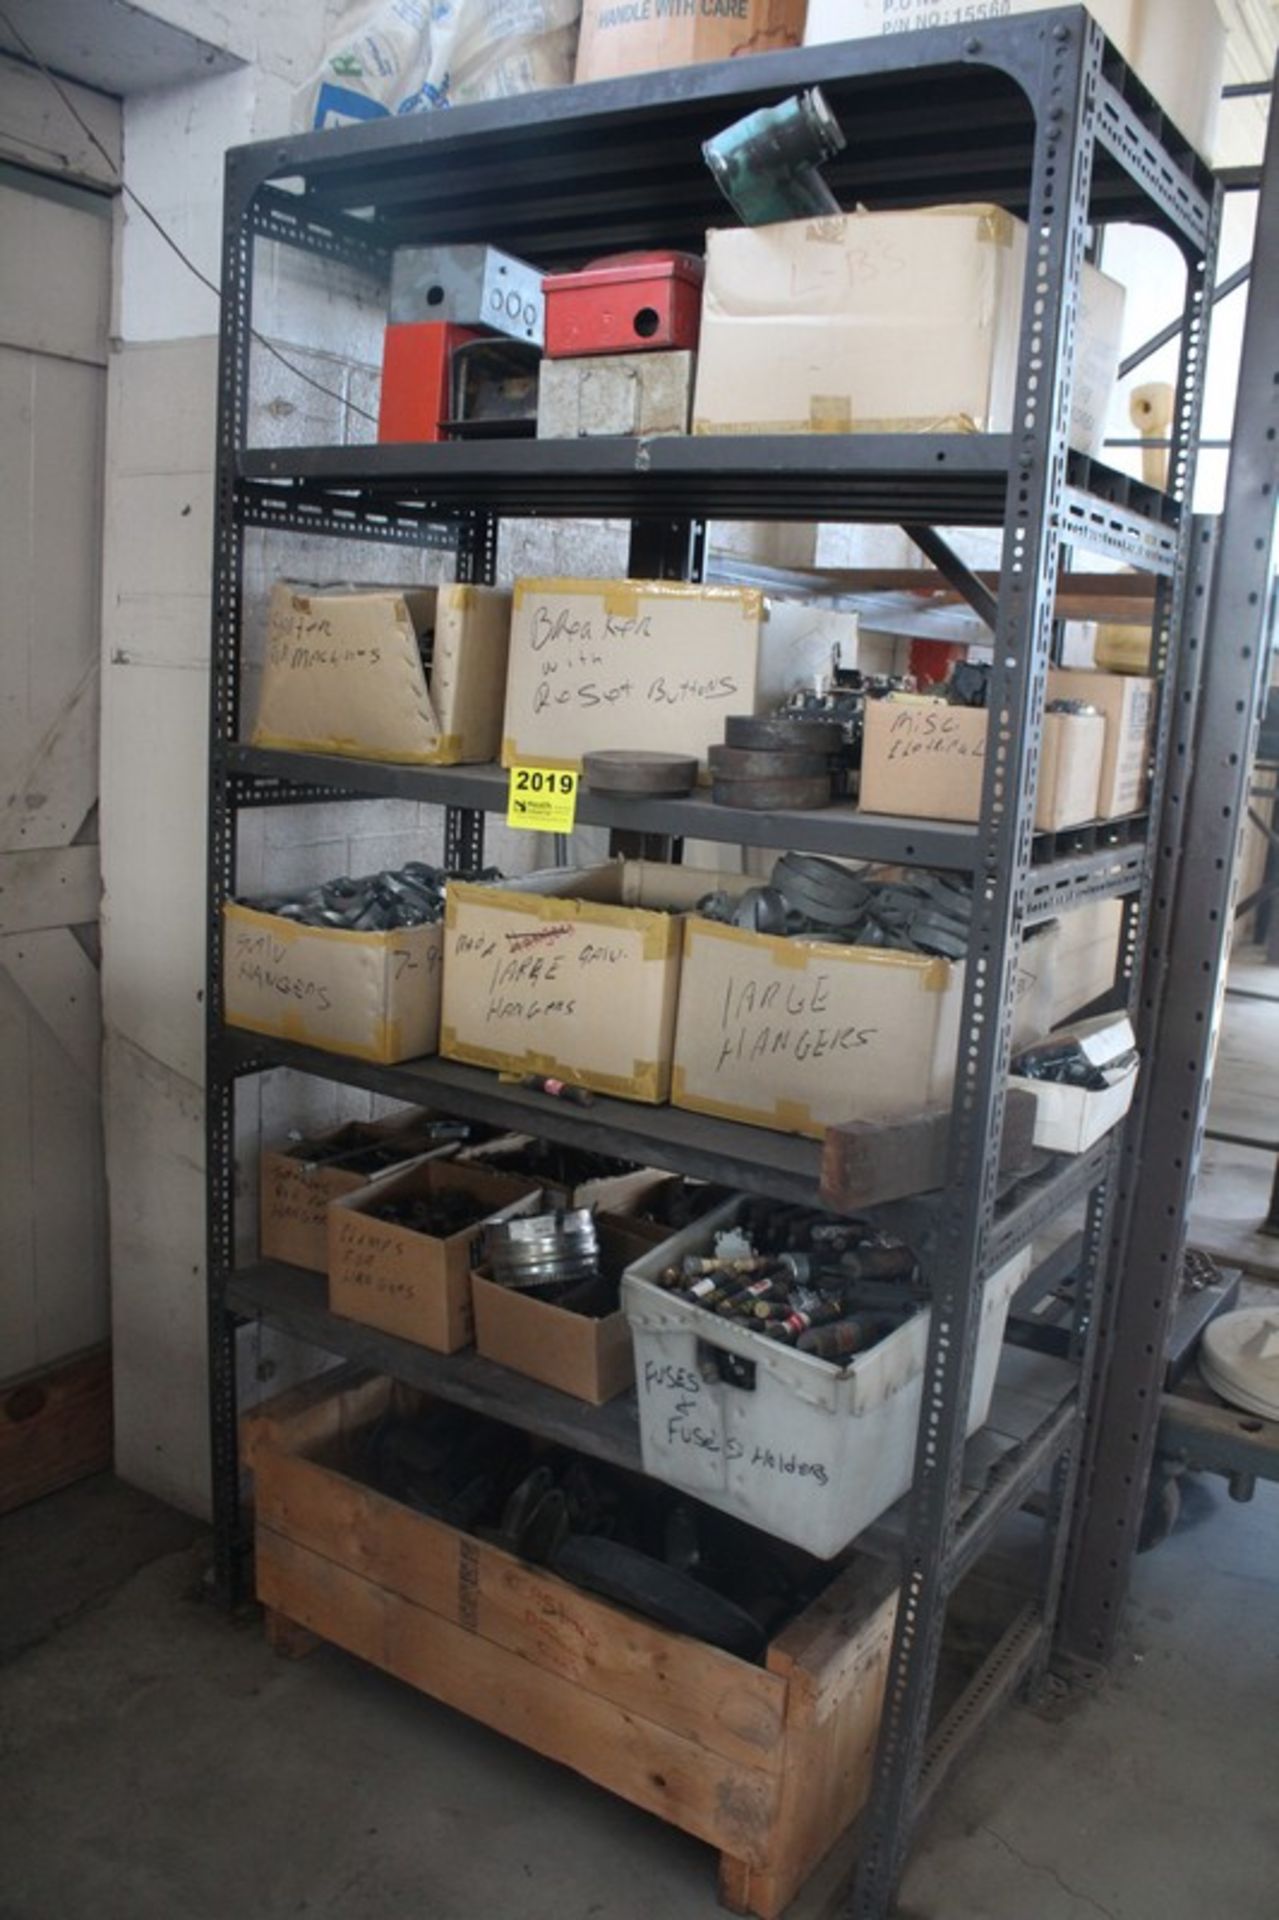 SHELVING UNIT WITH CONTENTS OF BREAKERS, STARTERS, HANGERS, FUSES, ETC.